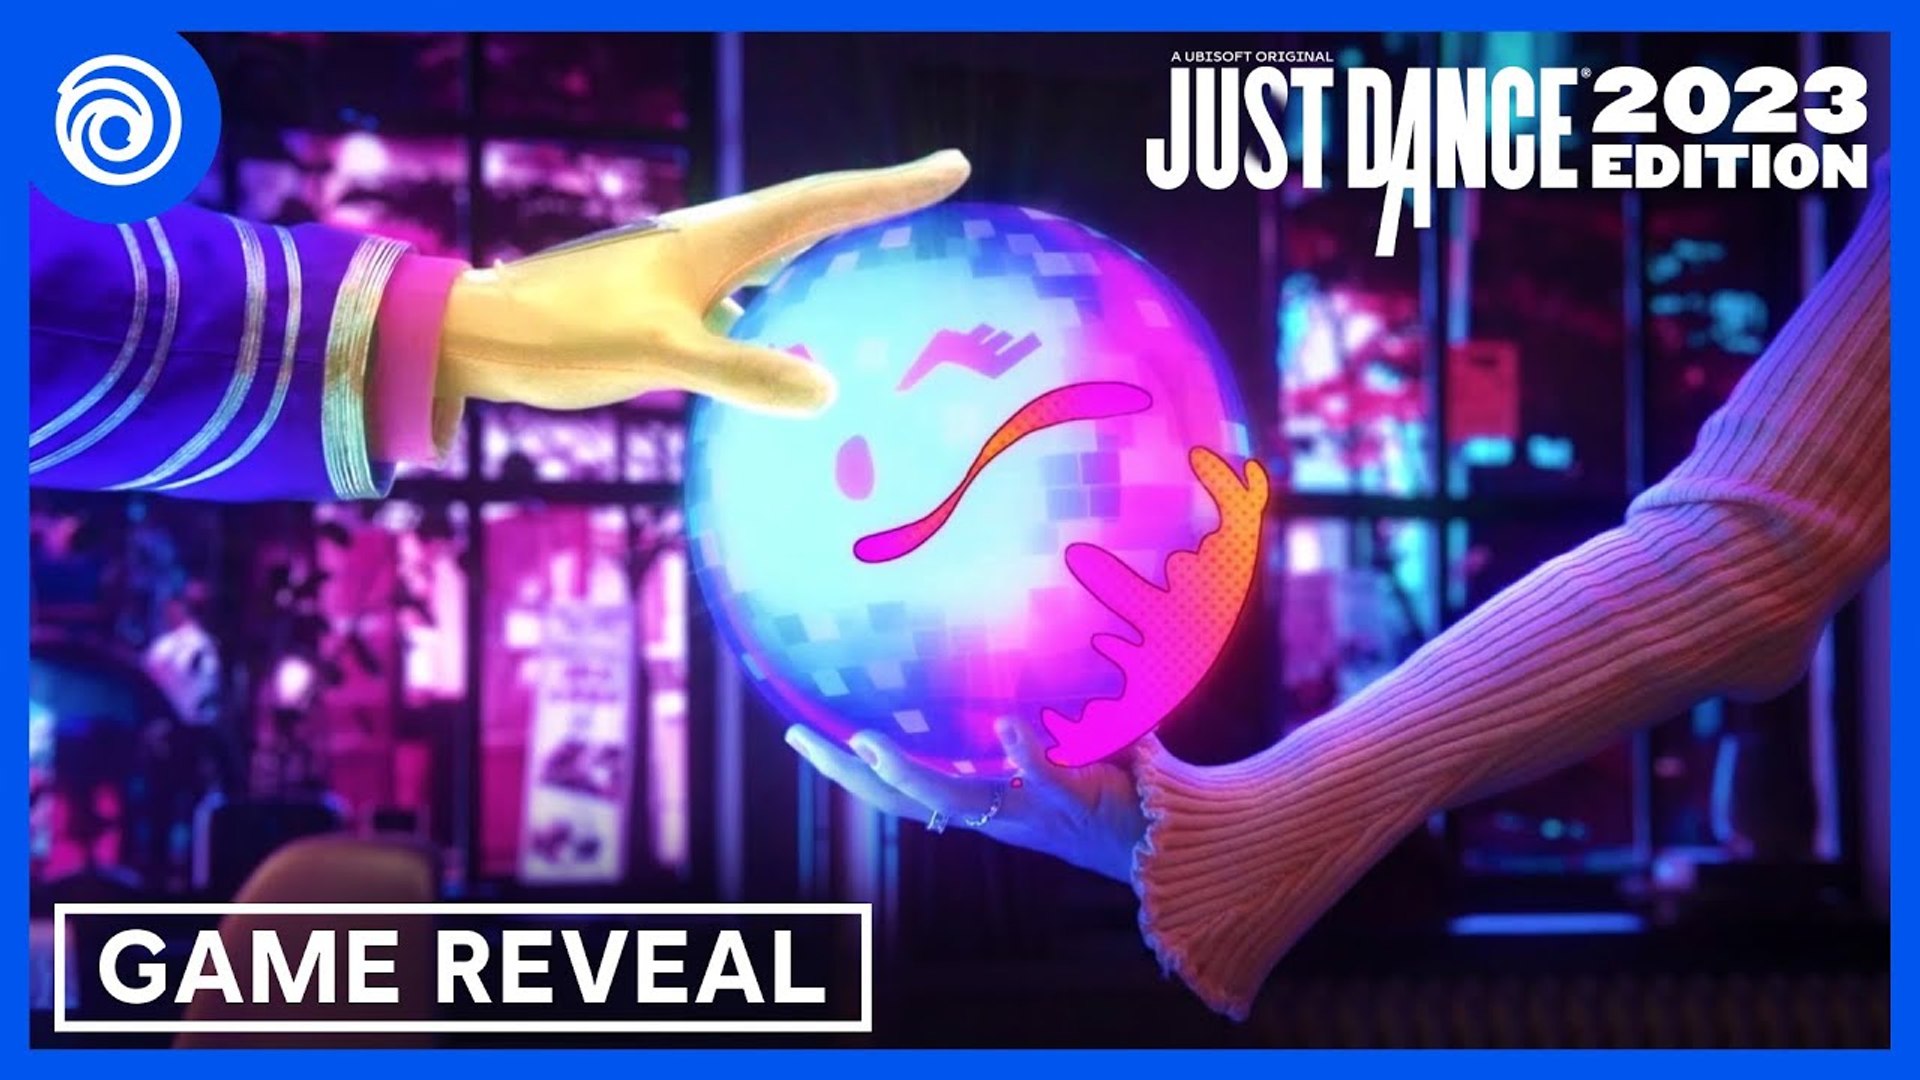 Just Dance 2023 Edition Announcement Video